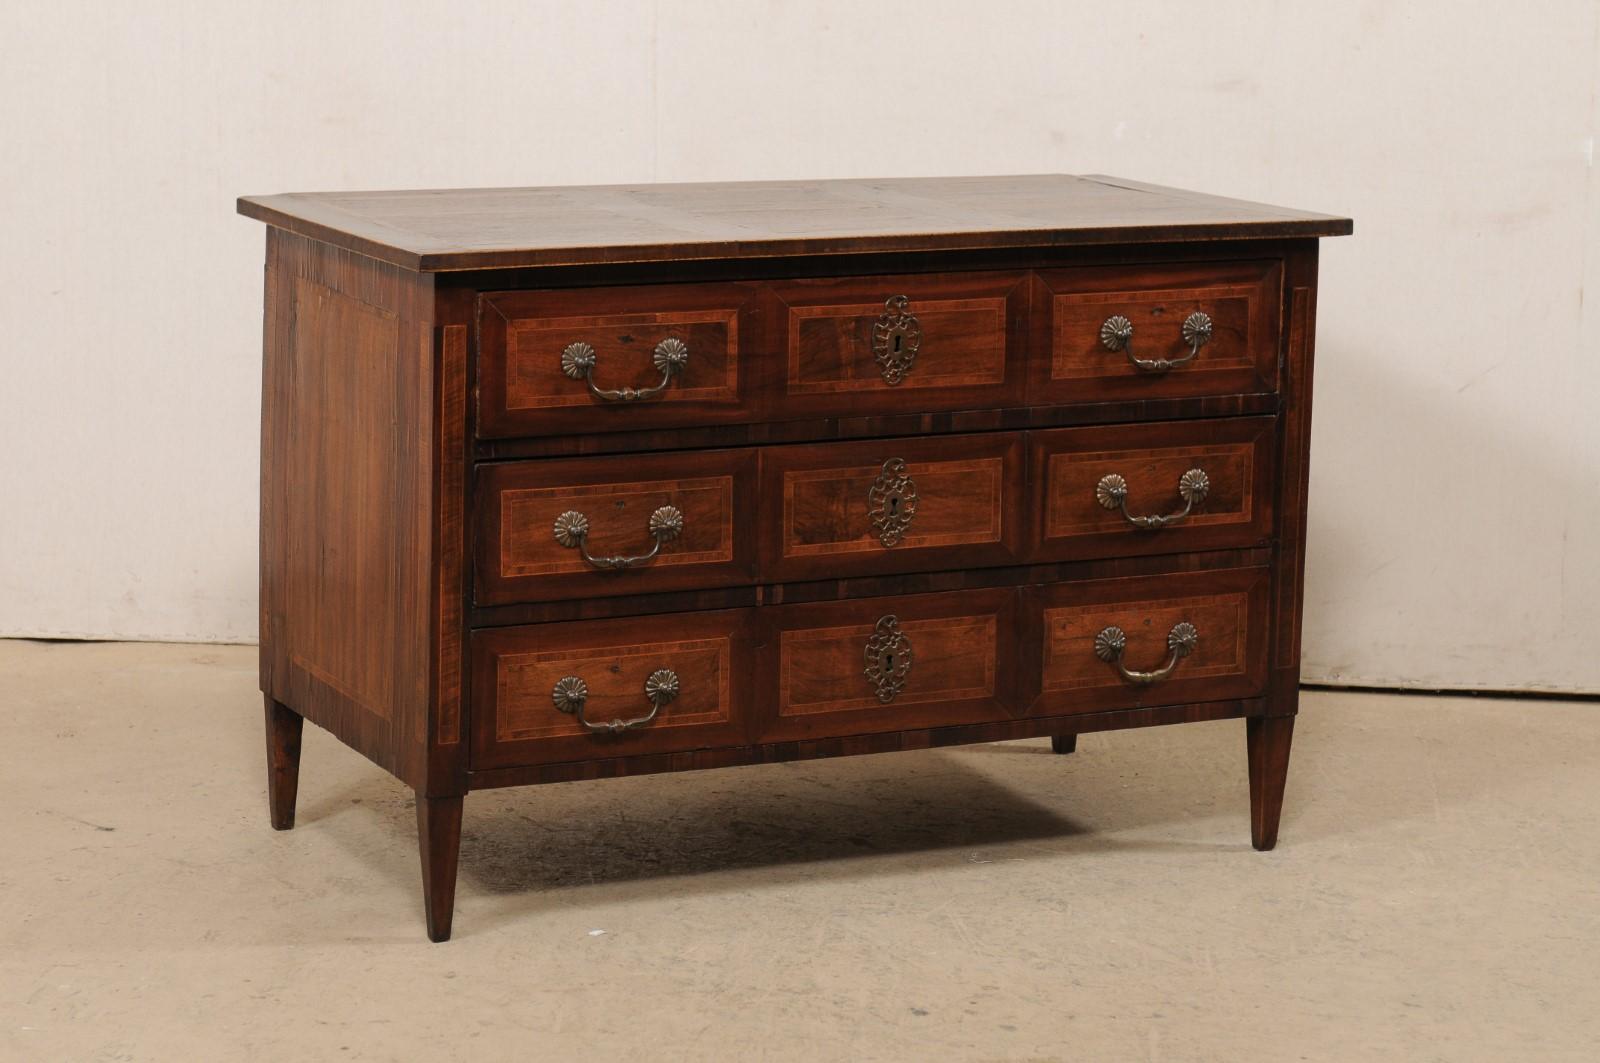 A French wood chest of three drawers, with beautiful veneers and inlay, from the 18th century. This antique commode from France was designed in nice clean lines, allowing the beautifully veneered wood grain and inlay banding to speak for the simple